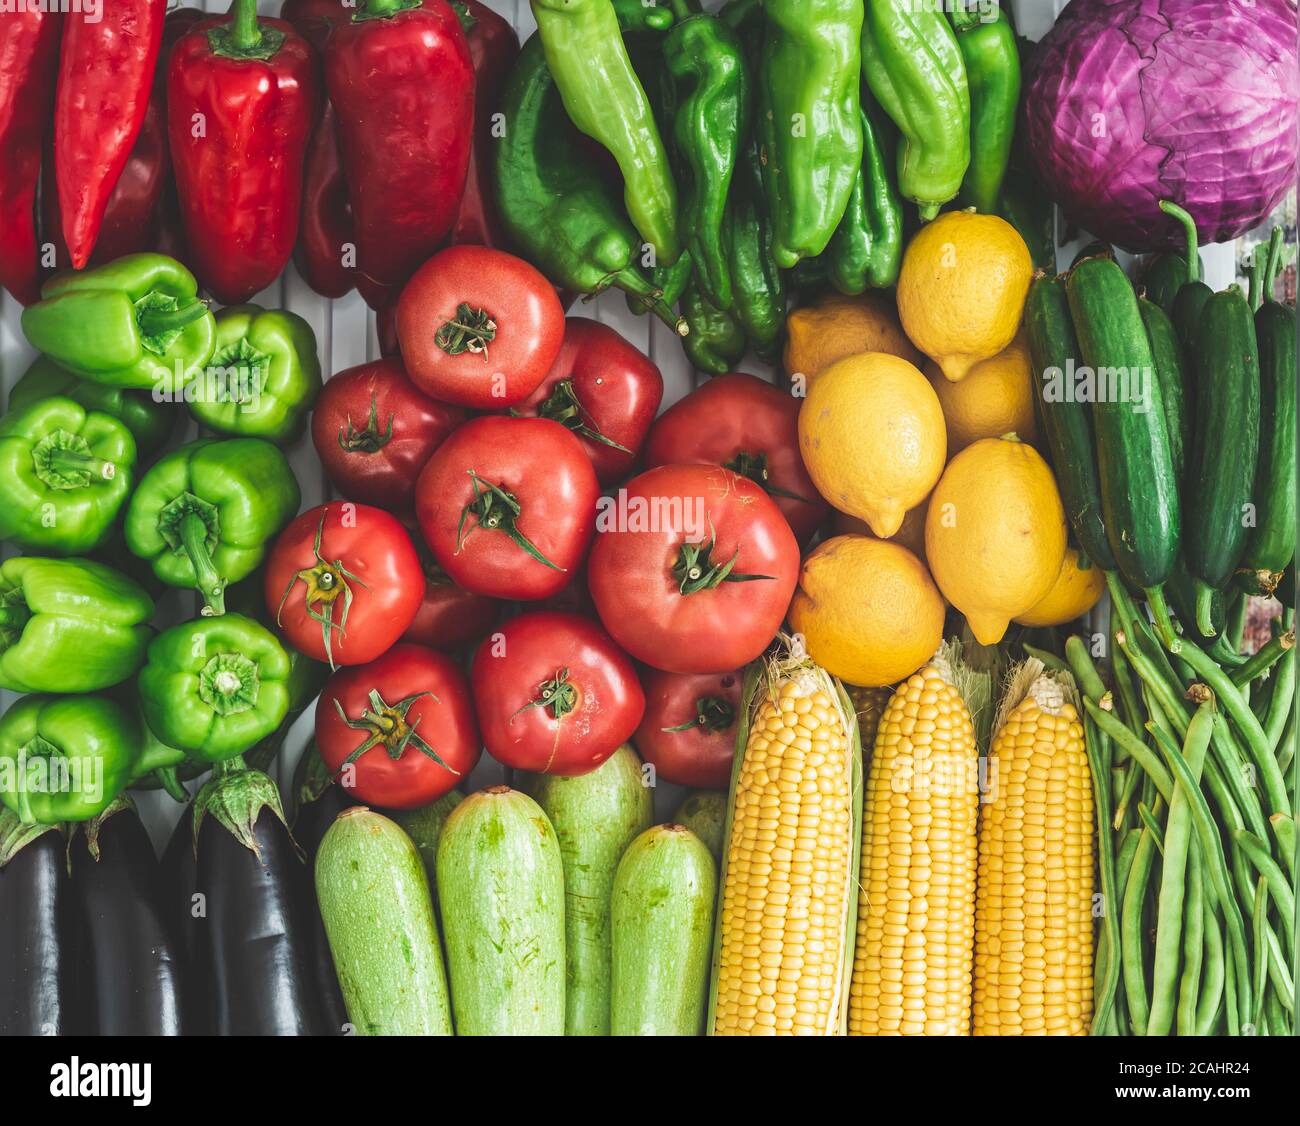 vegetables on the refrigerator shelf, autumn vegetables. full of corn, tomatoes, peppers, zucchini, cabbage, lemon, vegetables. Stock Photo